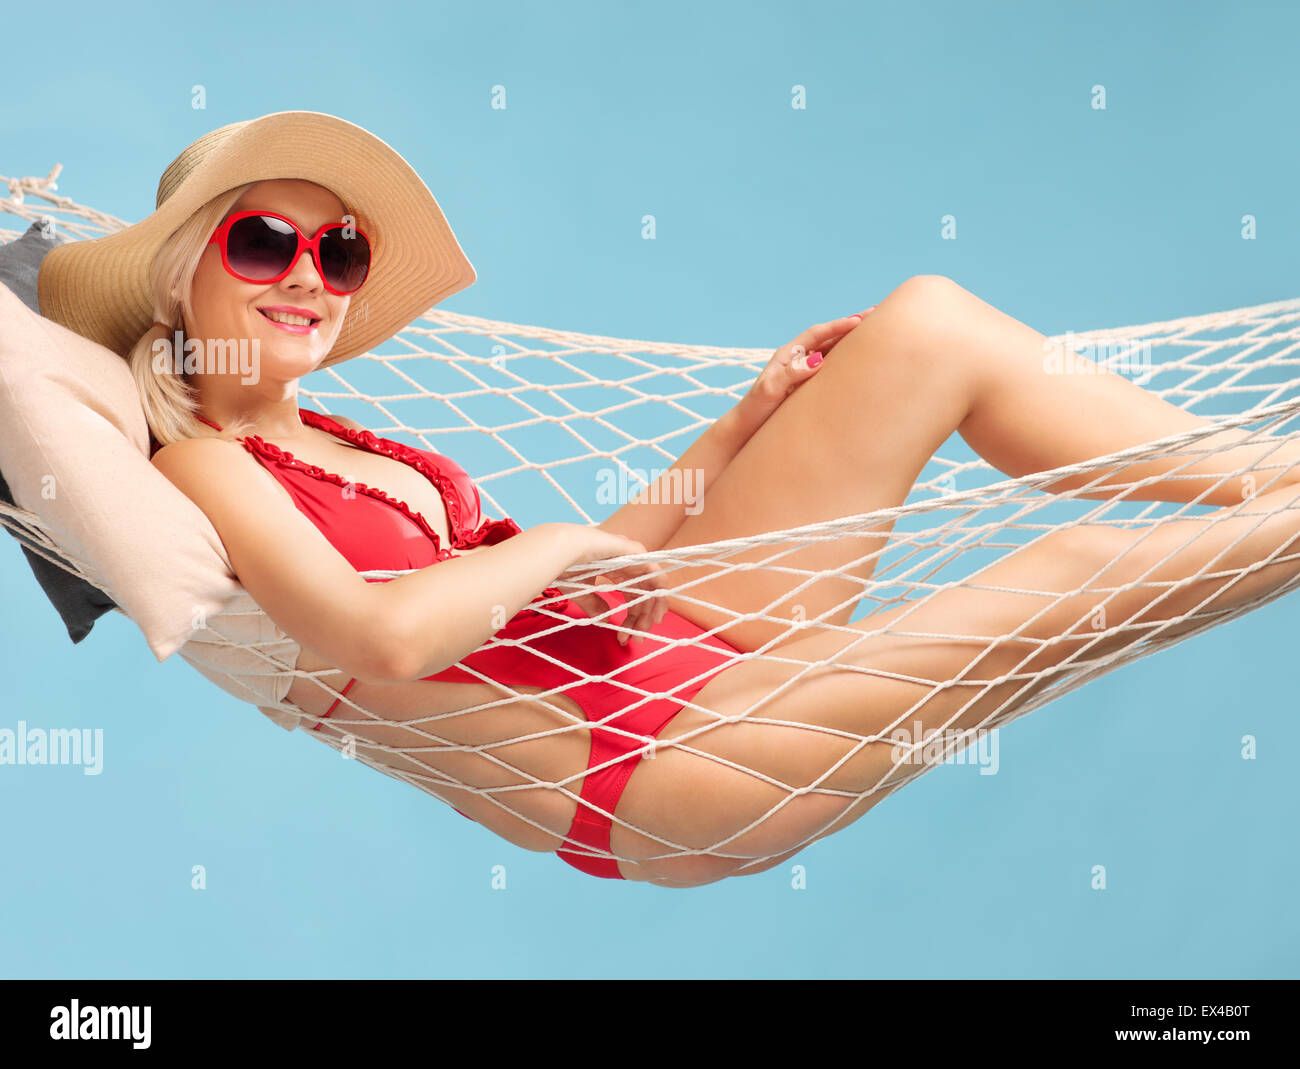 Beautiful woman in a red swimsuit wearing a stylish hat and lying in a hammock on blue background Stock Photo